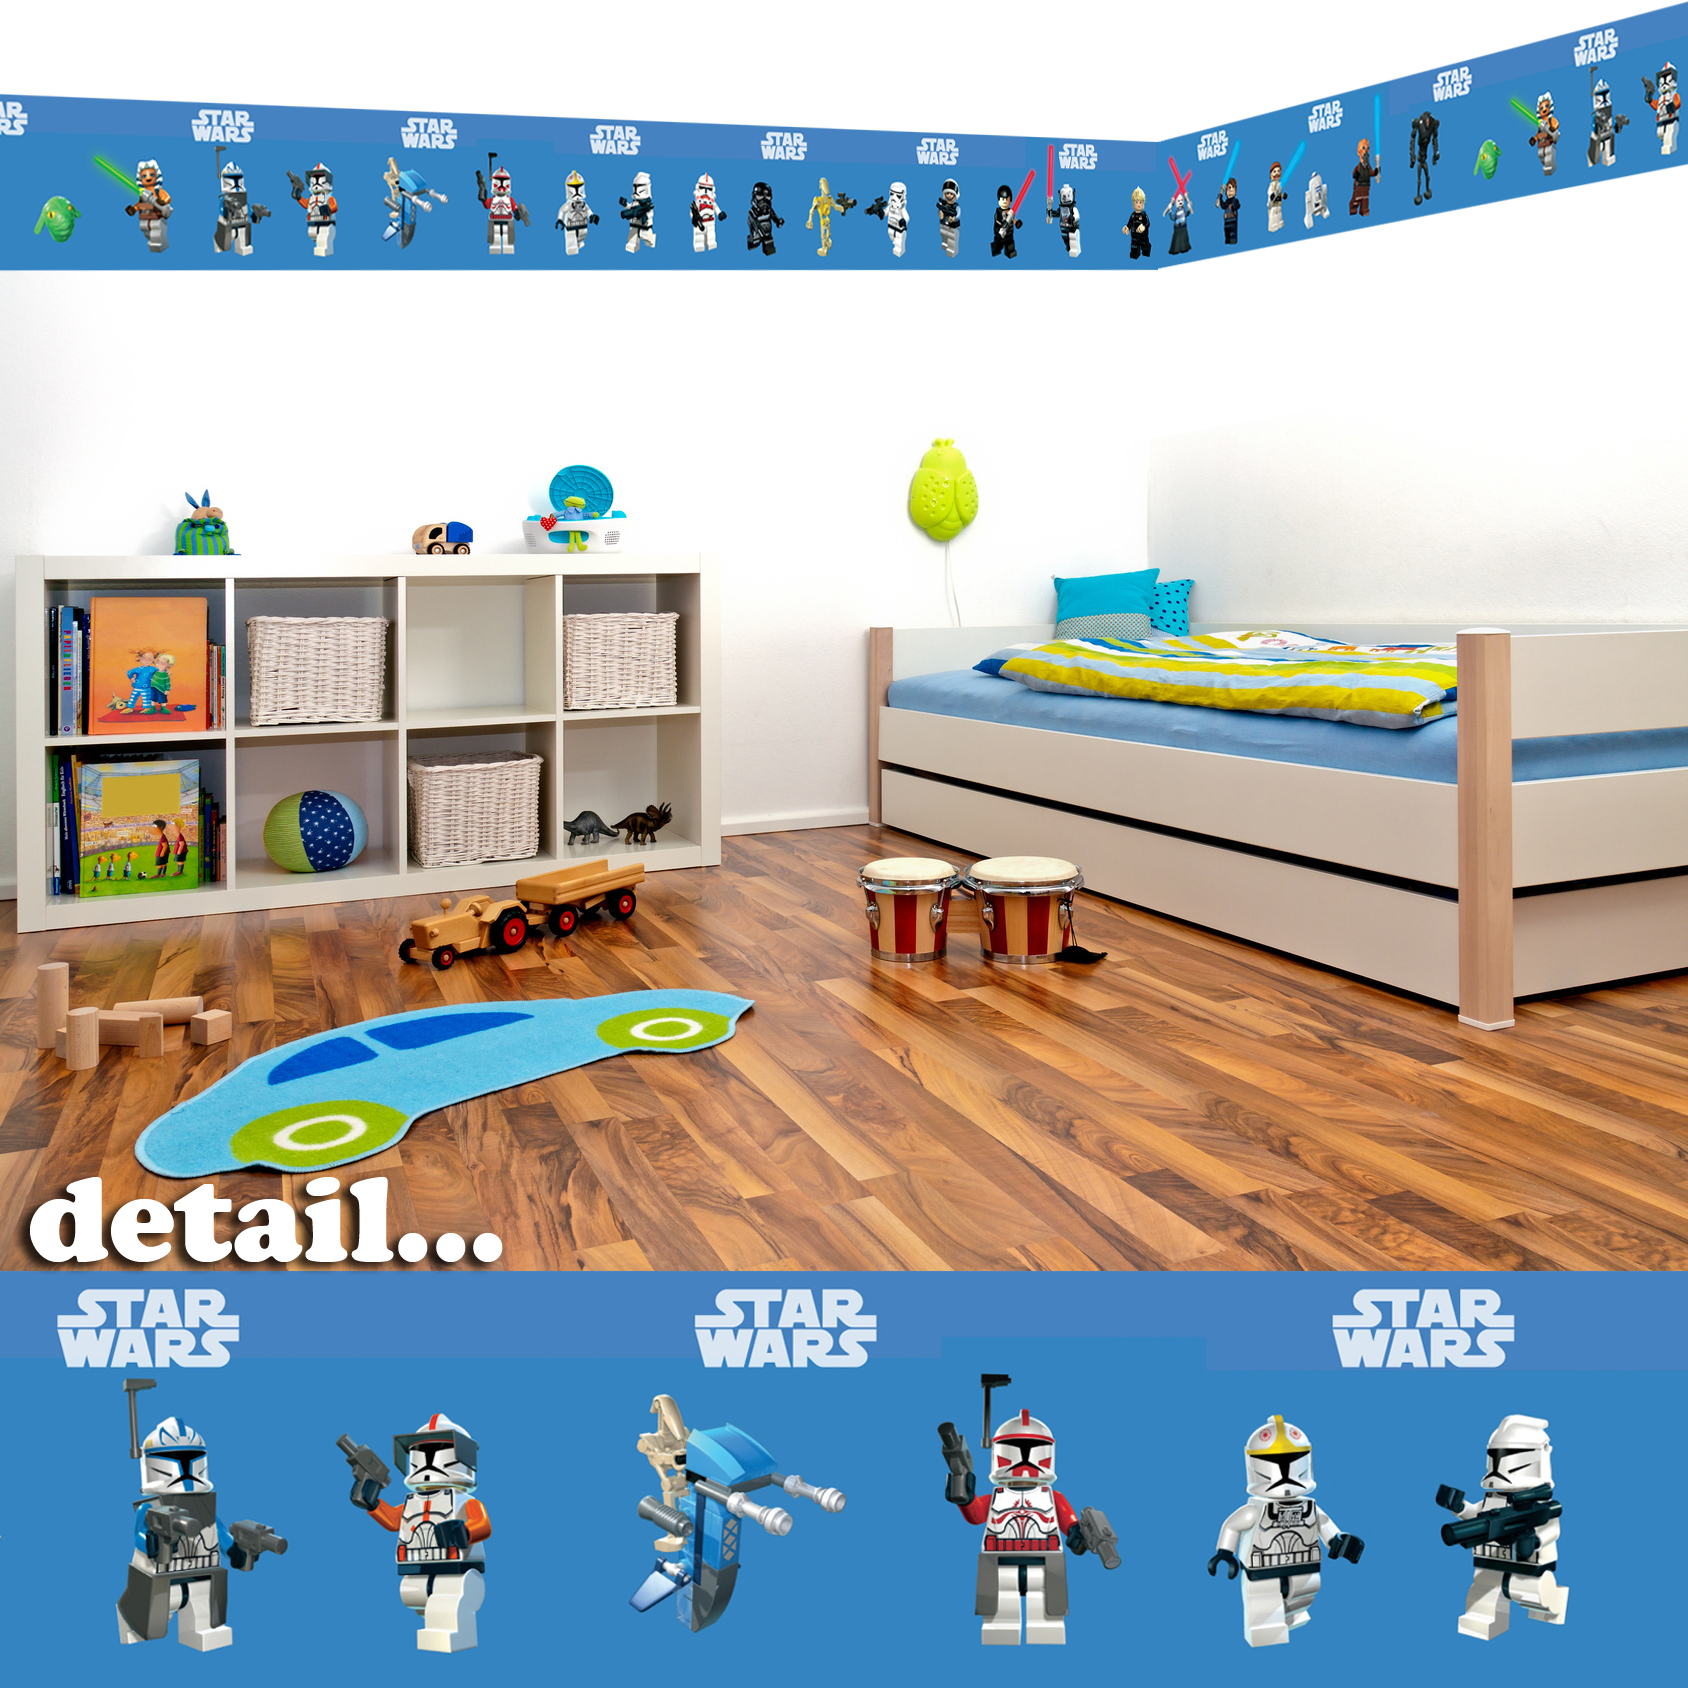 Details about Lego Star Wars Self Adhesive Decorative Wall Border   5